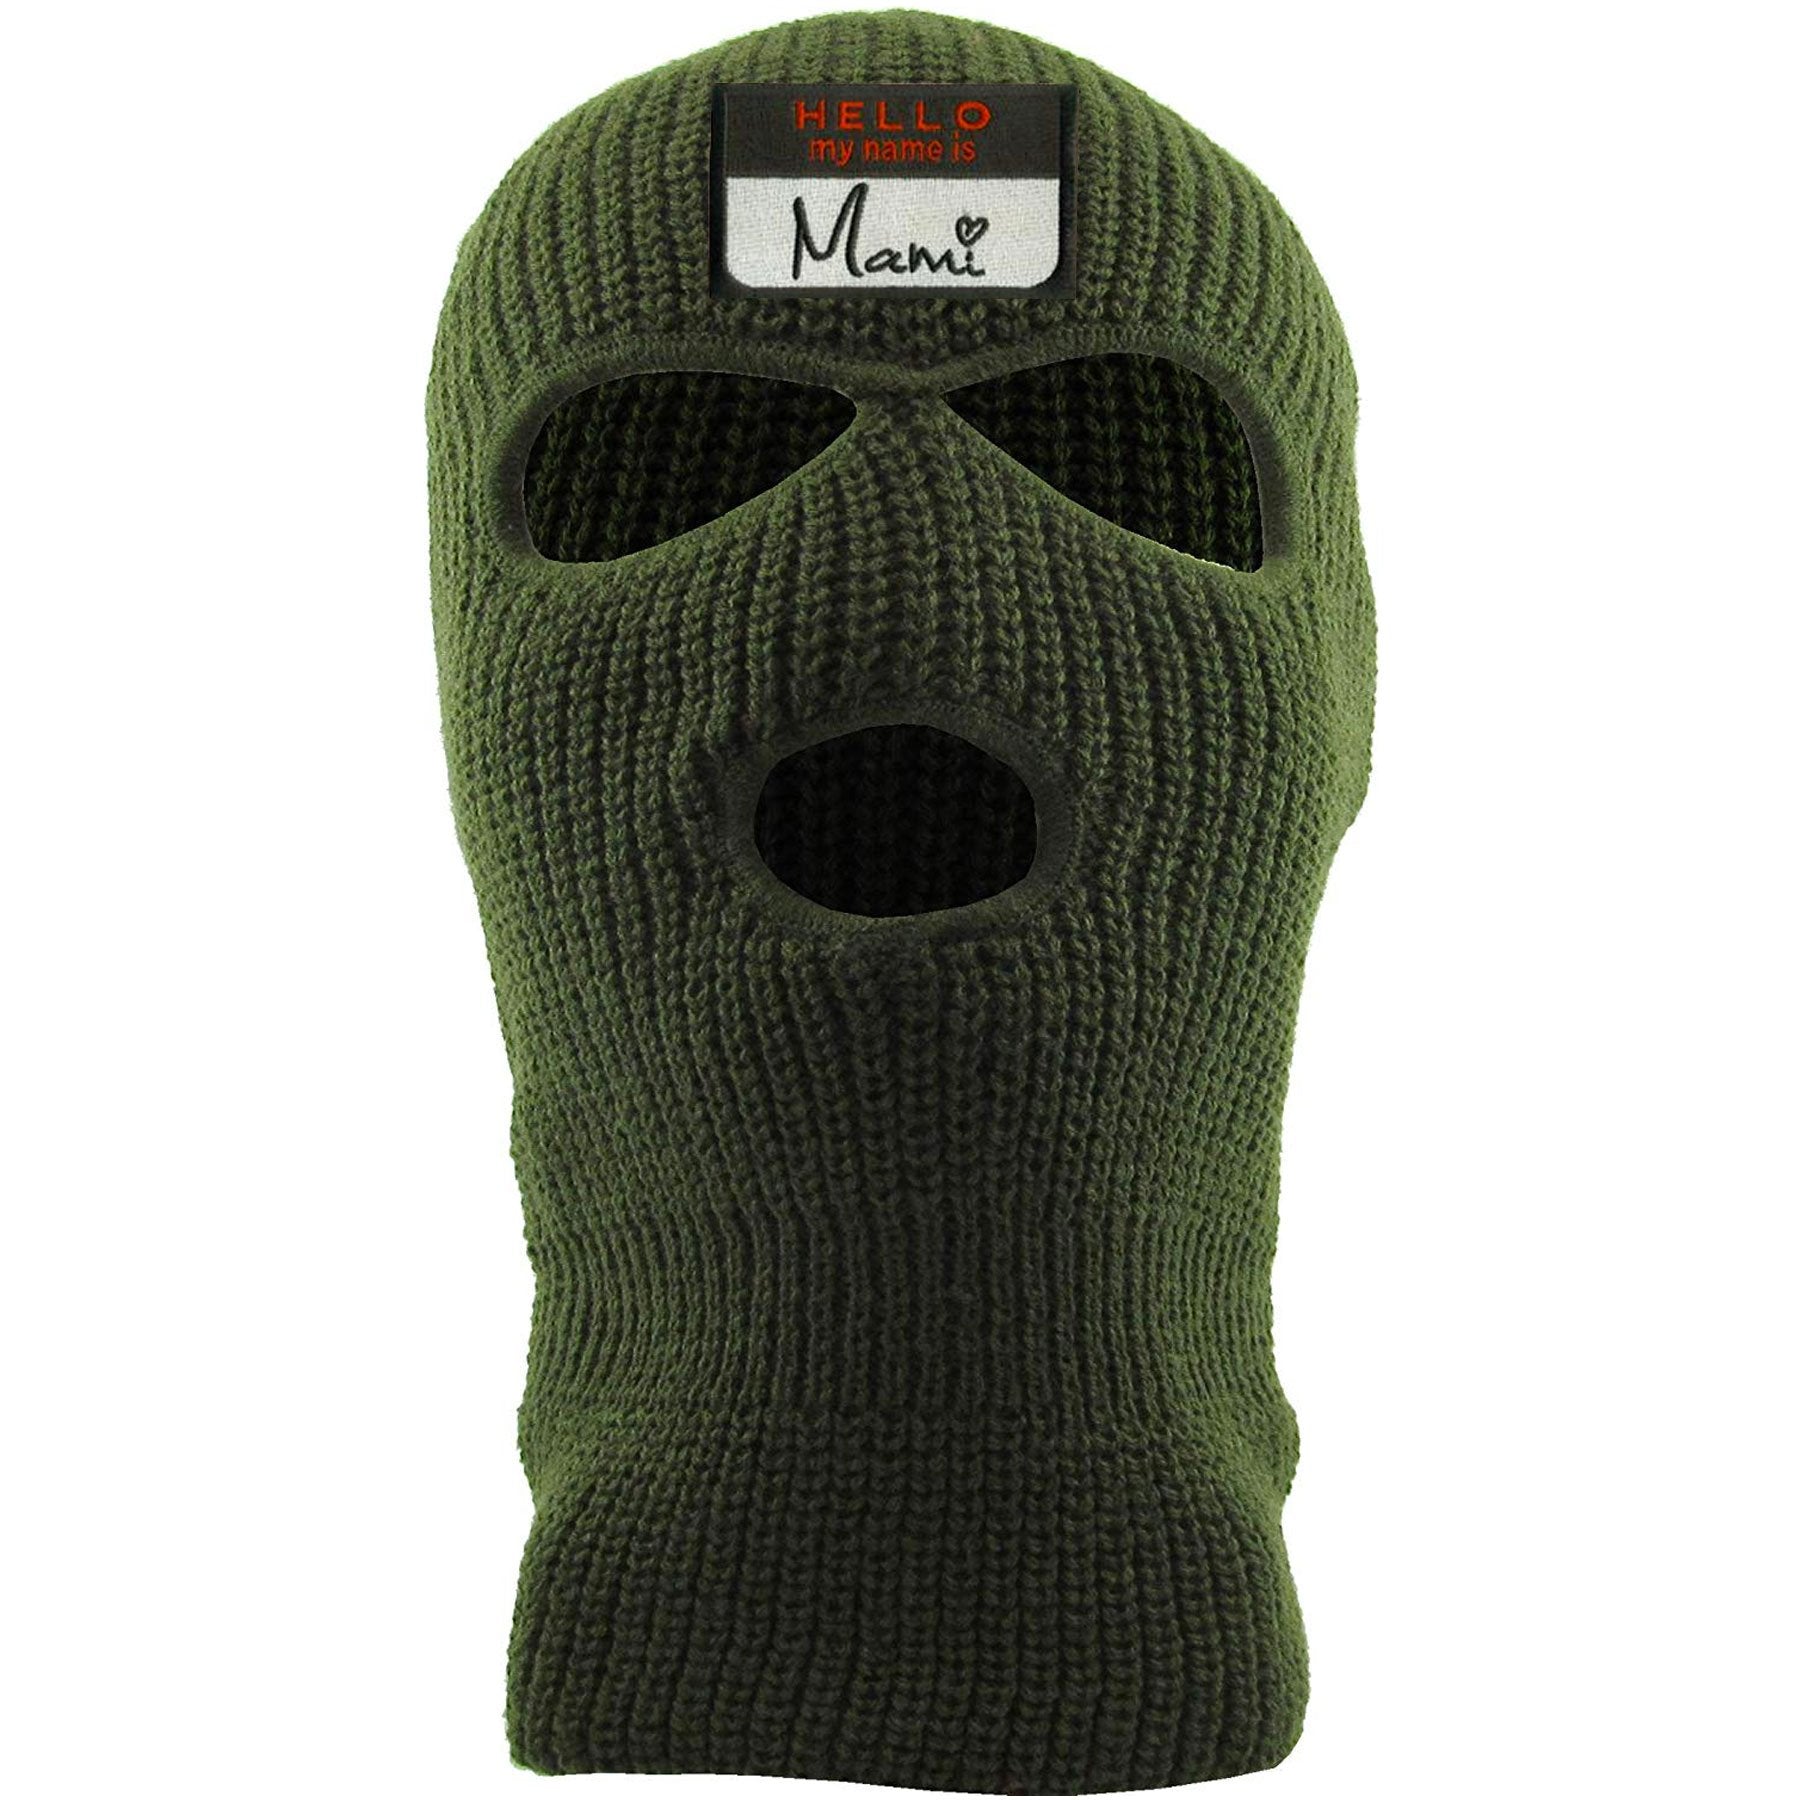 Embroidered on the front of the olive knit 3 hole ski mask is the hello my name is mami logo embroidered in white, red, and black